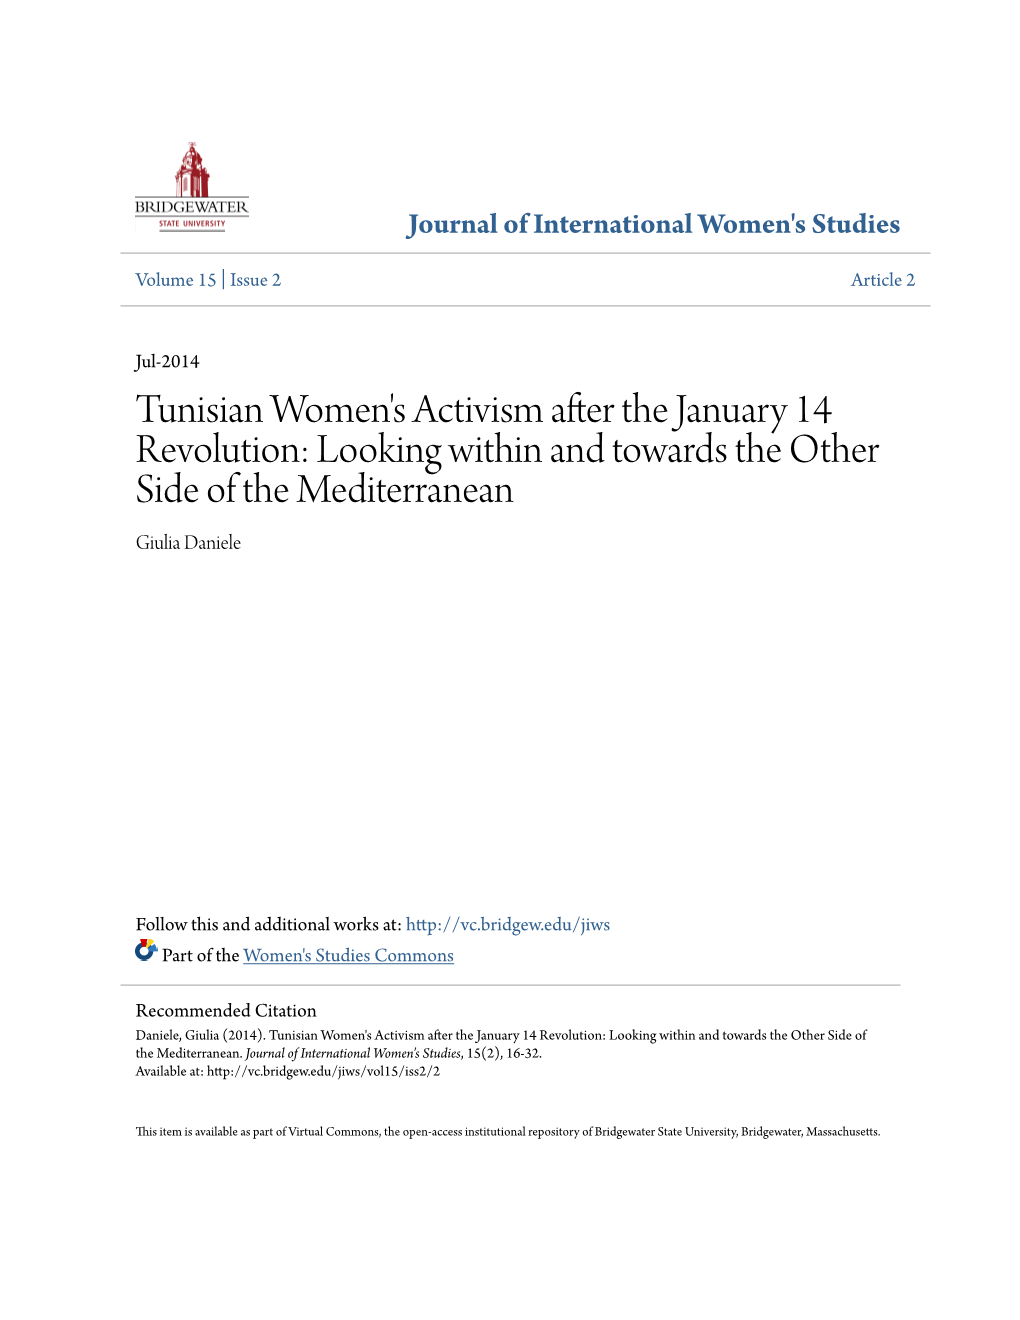 Tunisian Women's Activism After the January 14 Revolution: Looking Within and Towards the Other Side of the Mediterranean Giulia Daniele